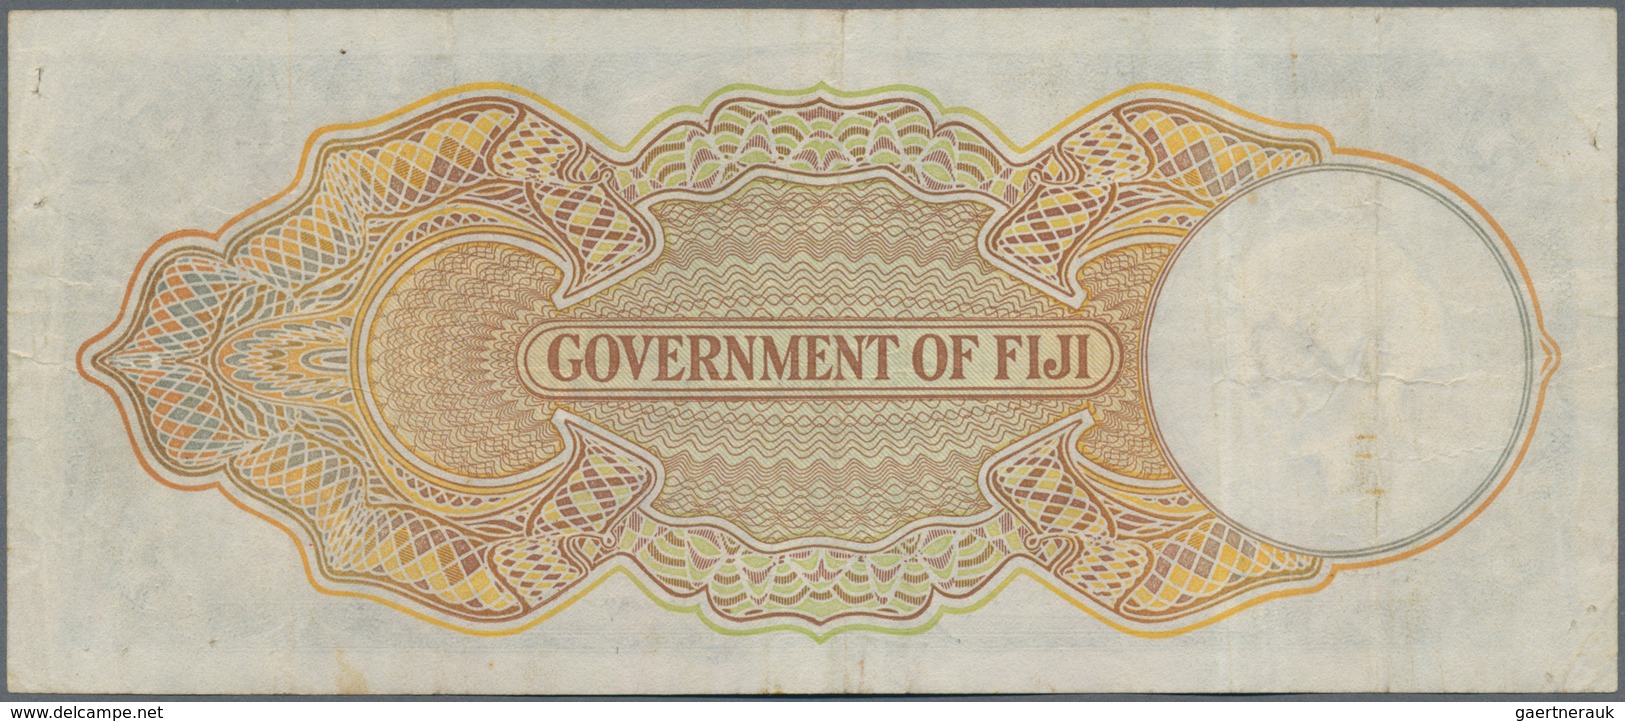 Fiji: 5 Shillings 1938 P. 37b, Used With Light Folds In Paper But No Holes Or Tears, Still Crispness - Fidschi